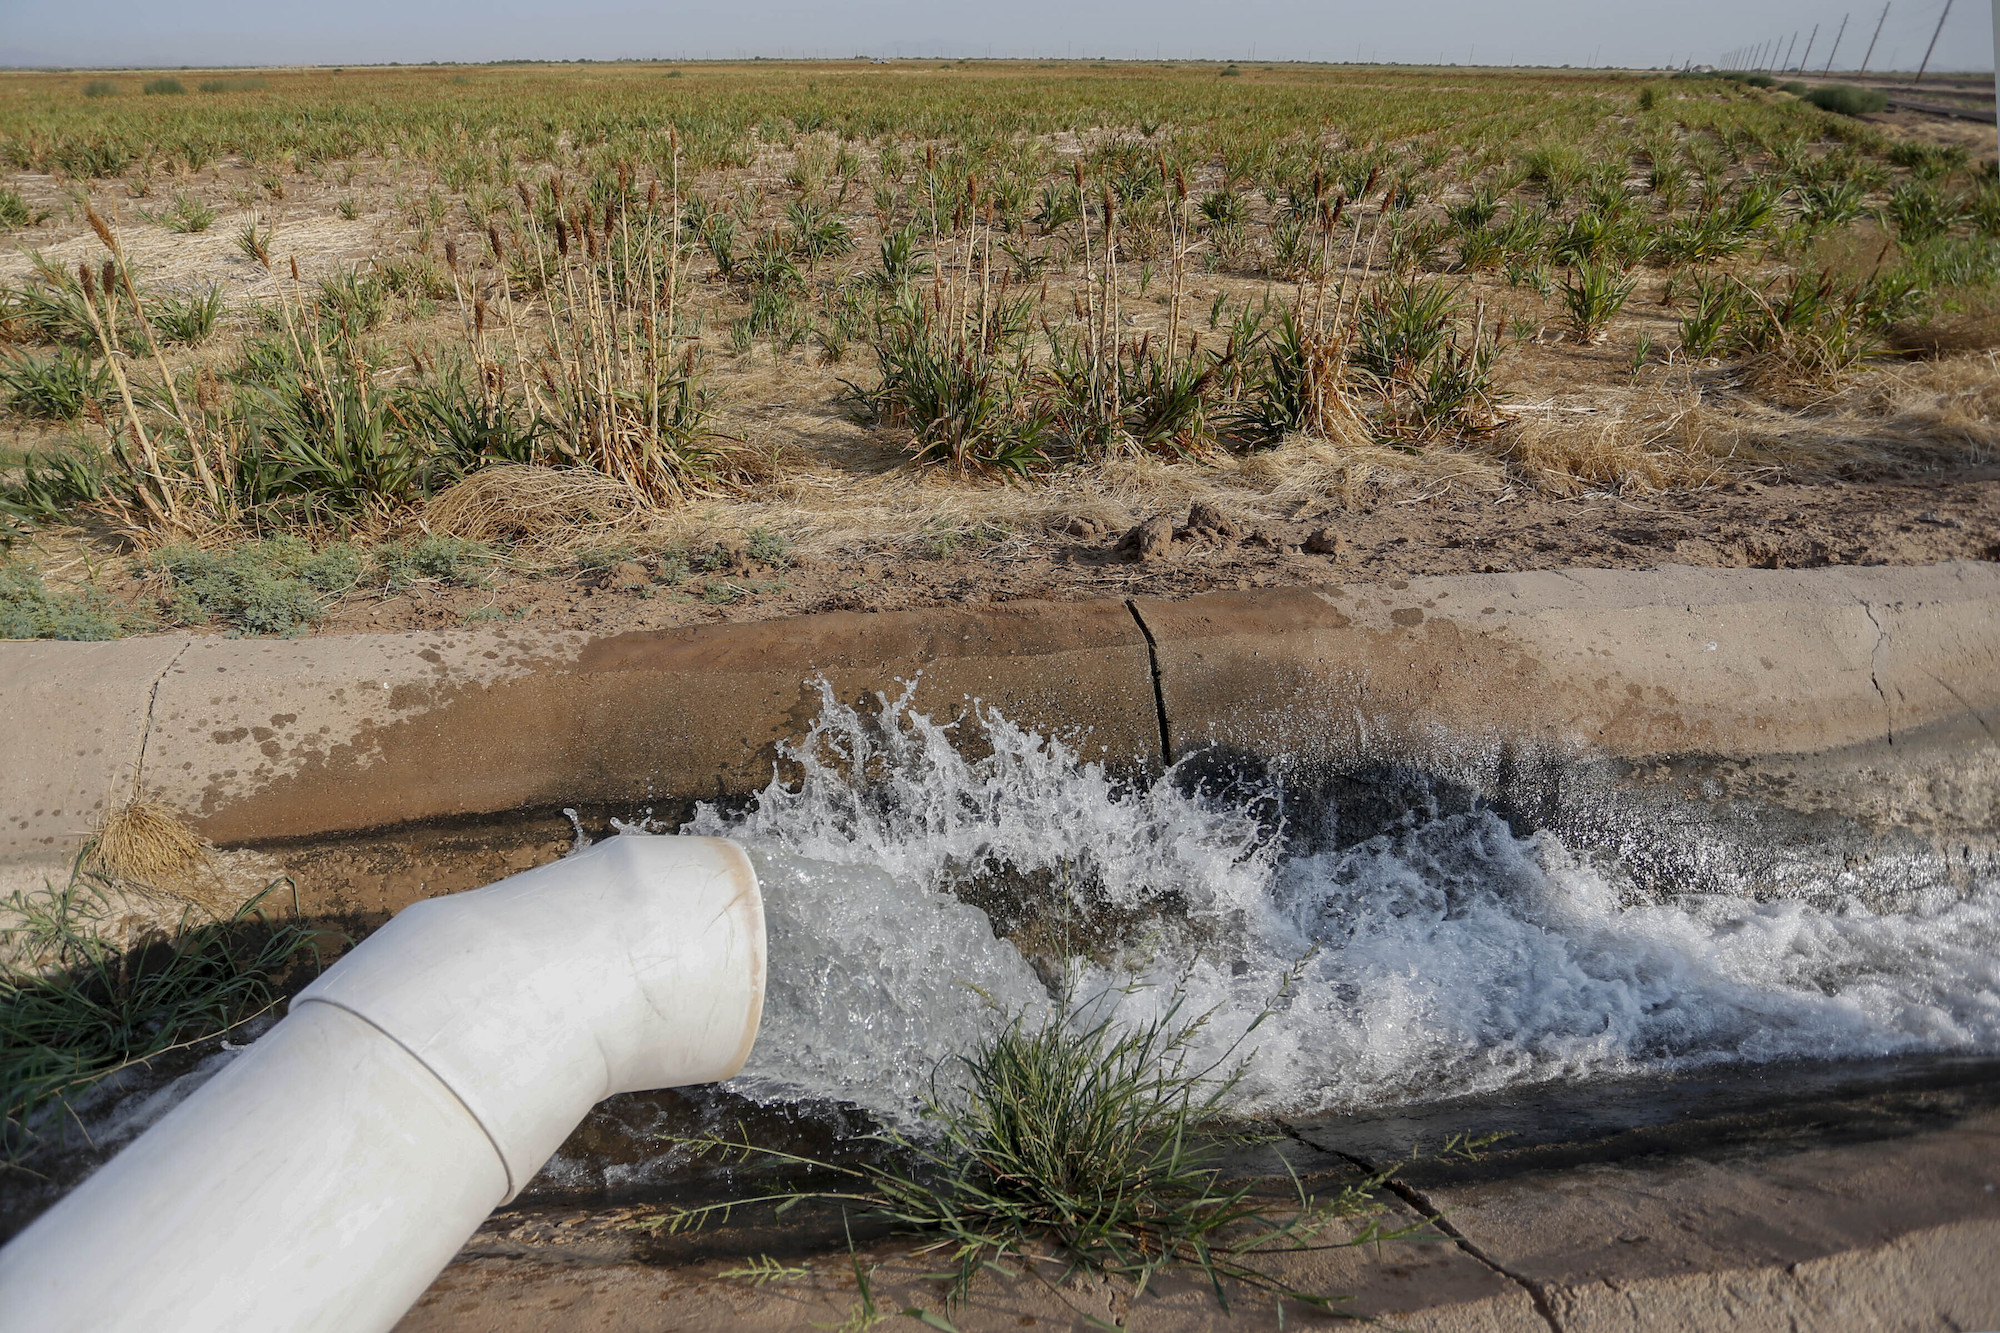 water flows from a white outdoor pipe into an irrigation canal amid dry land and brush